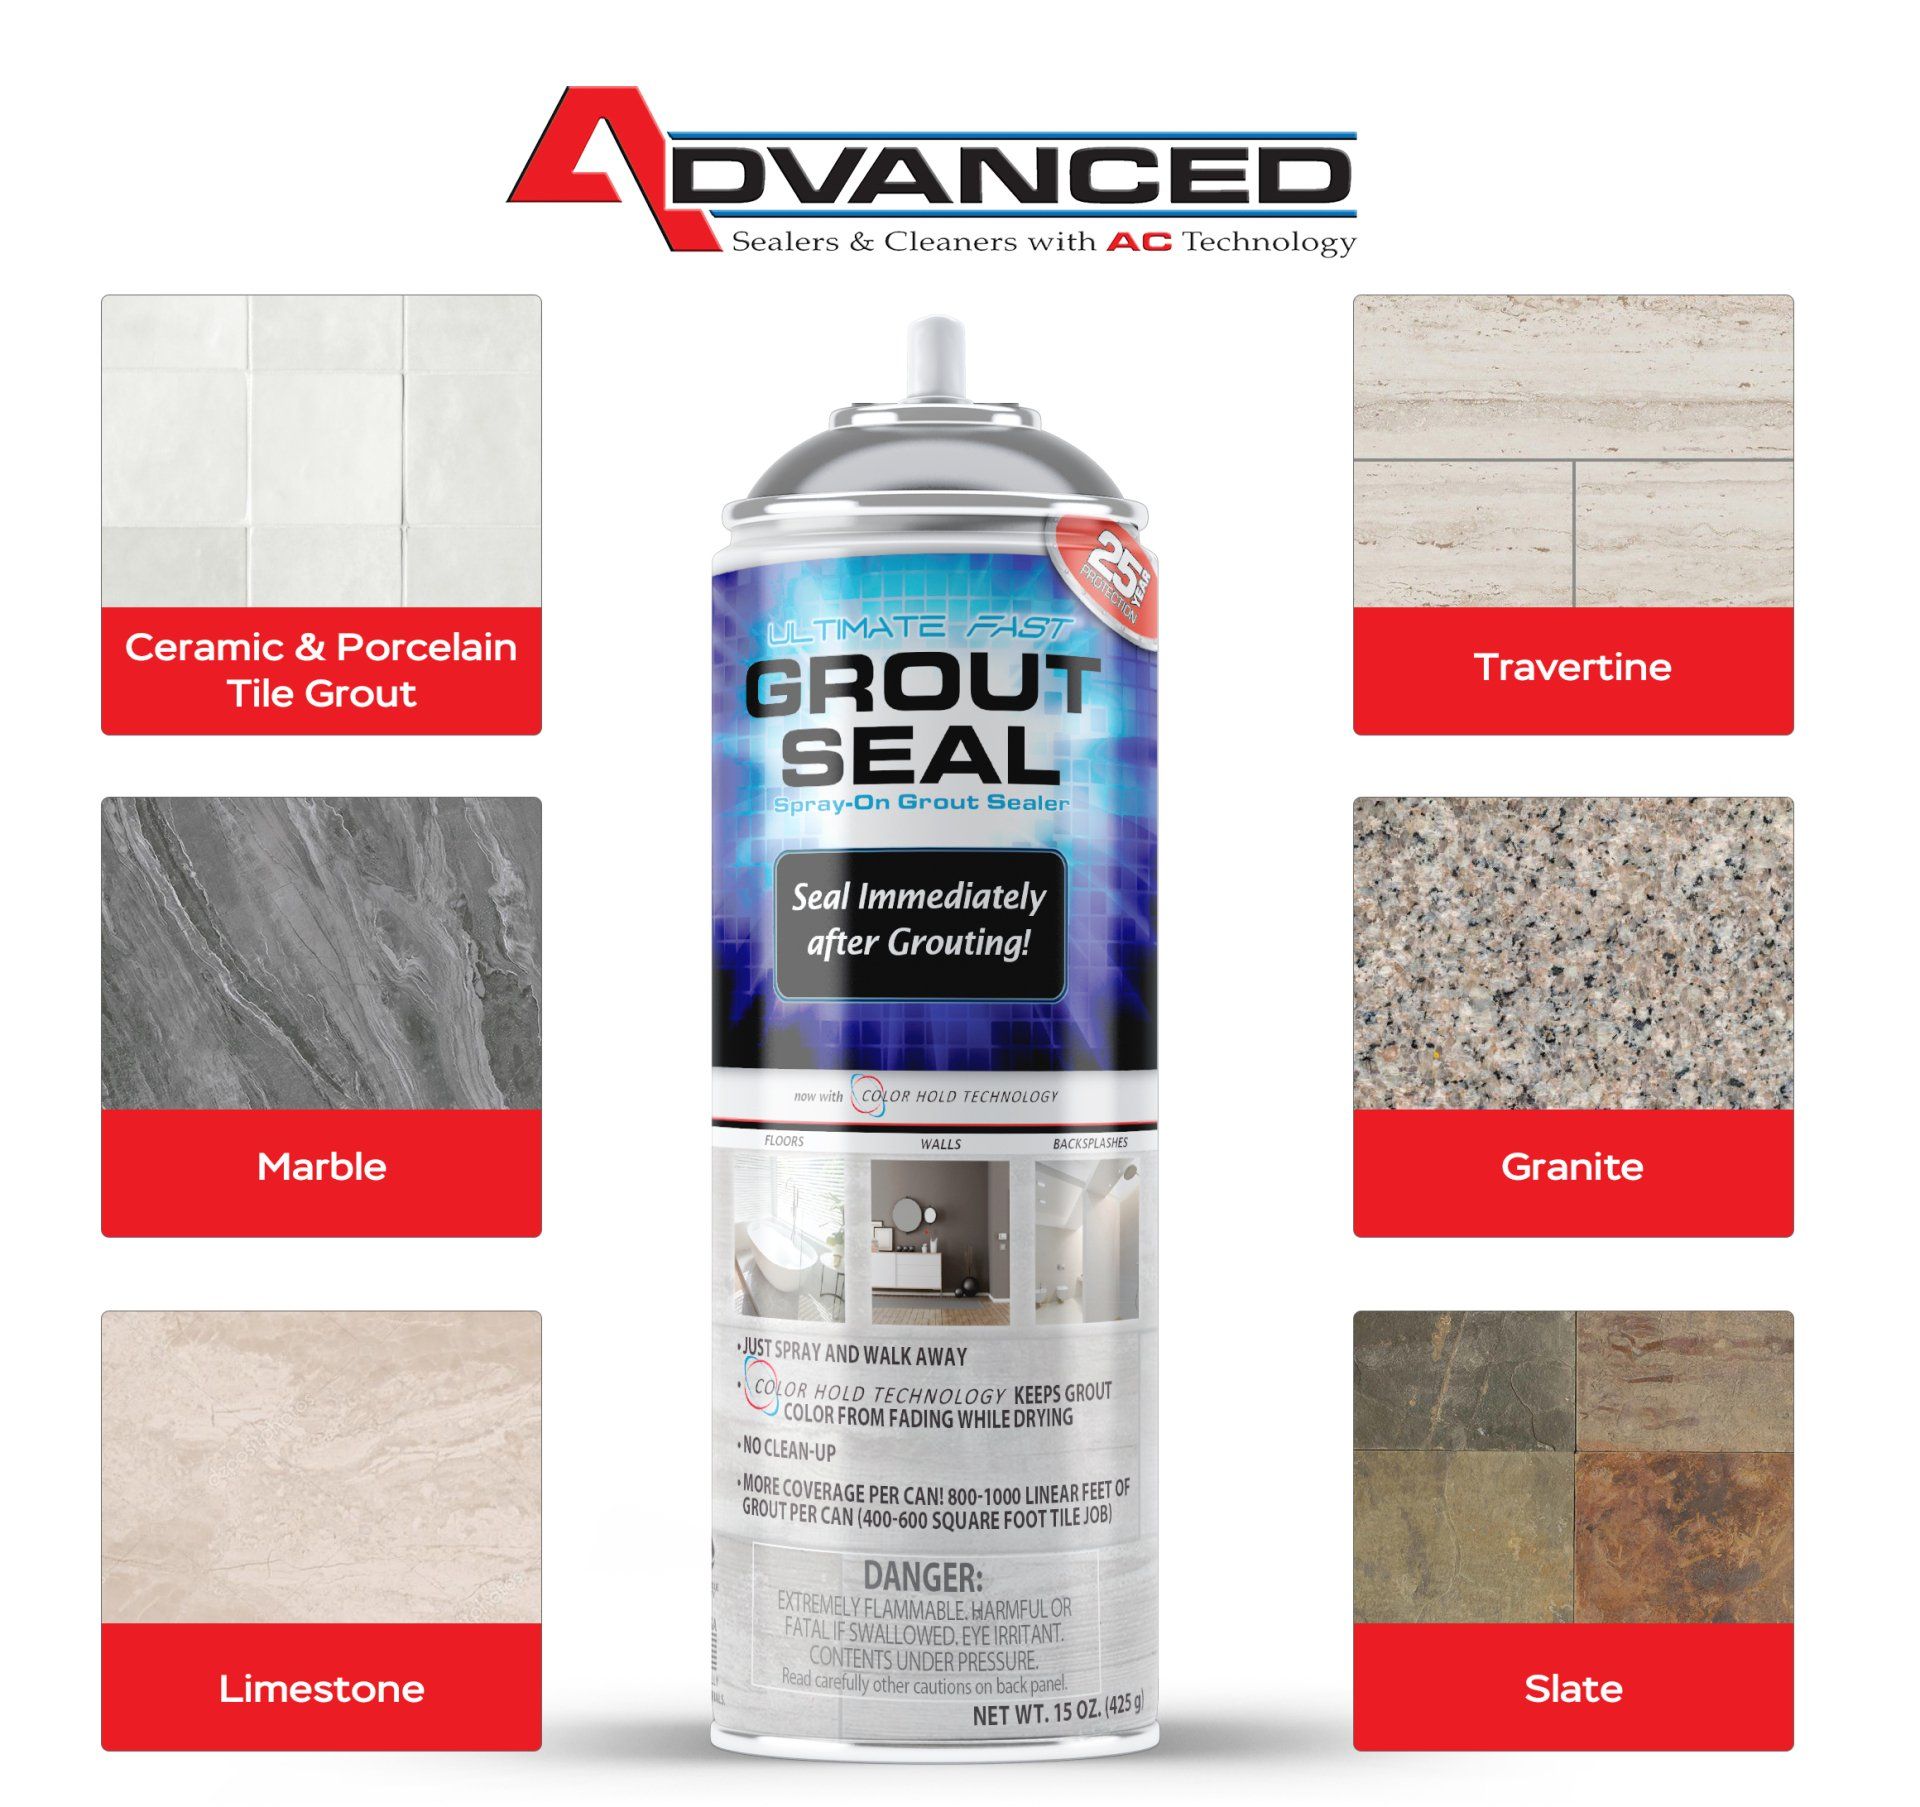 grout sealer uses